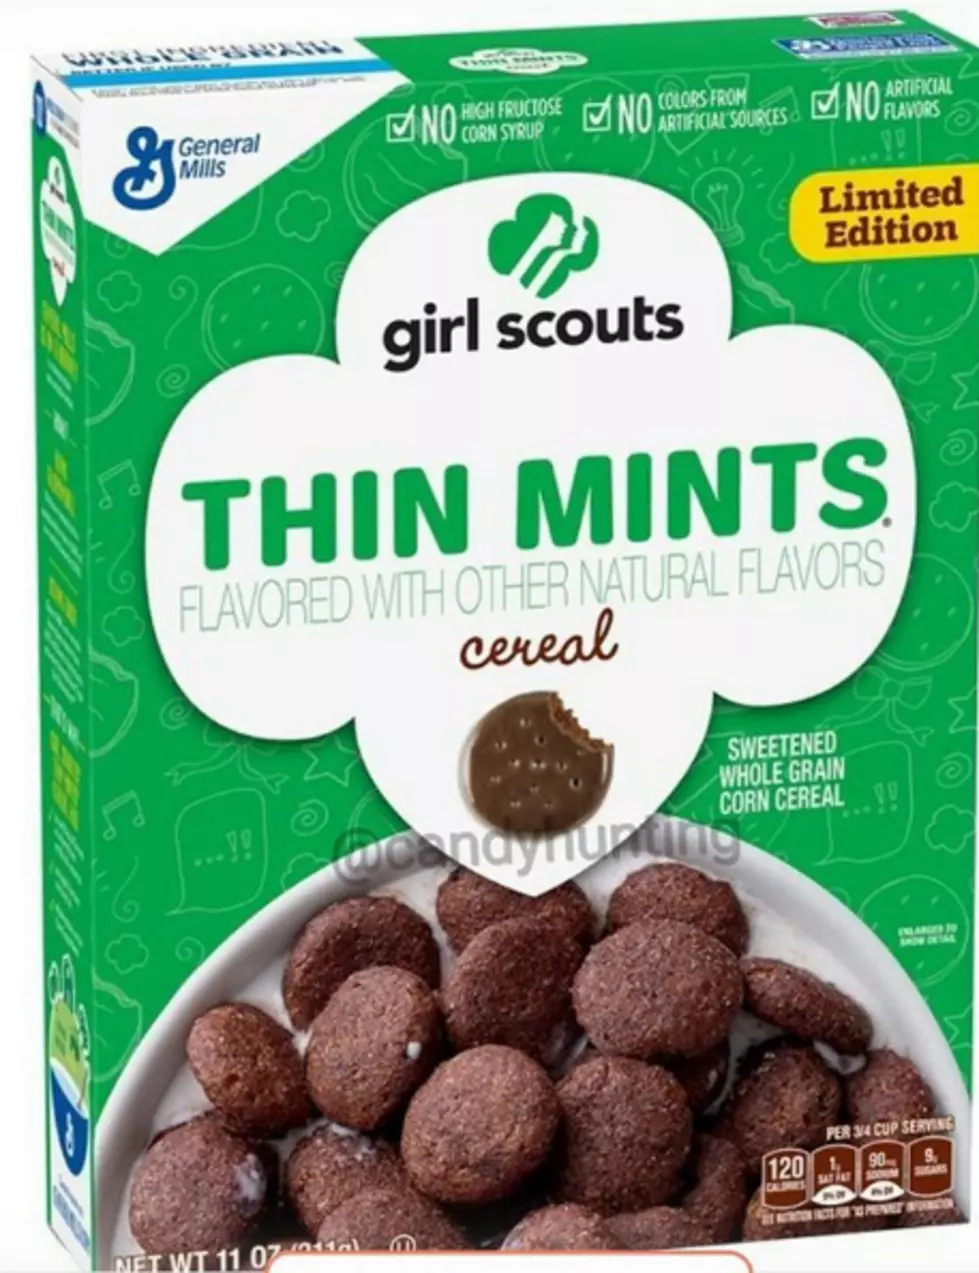 Girl Scout Cookie Breakfast Cereal Is Coming!